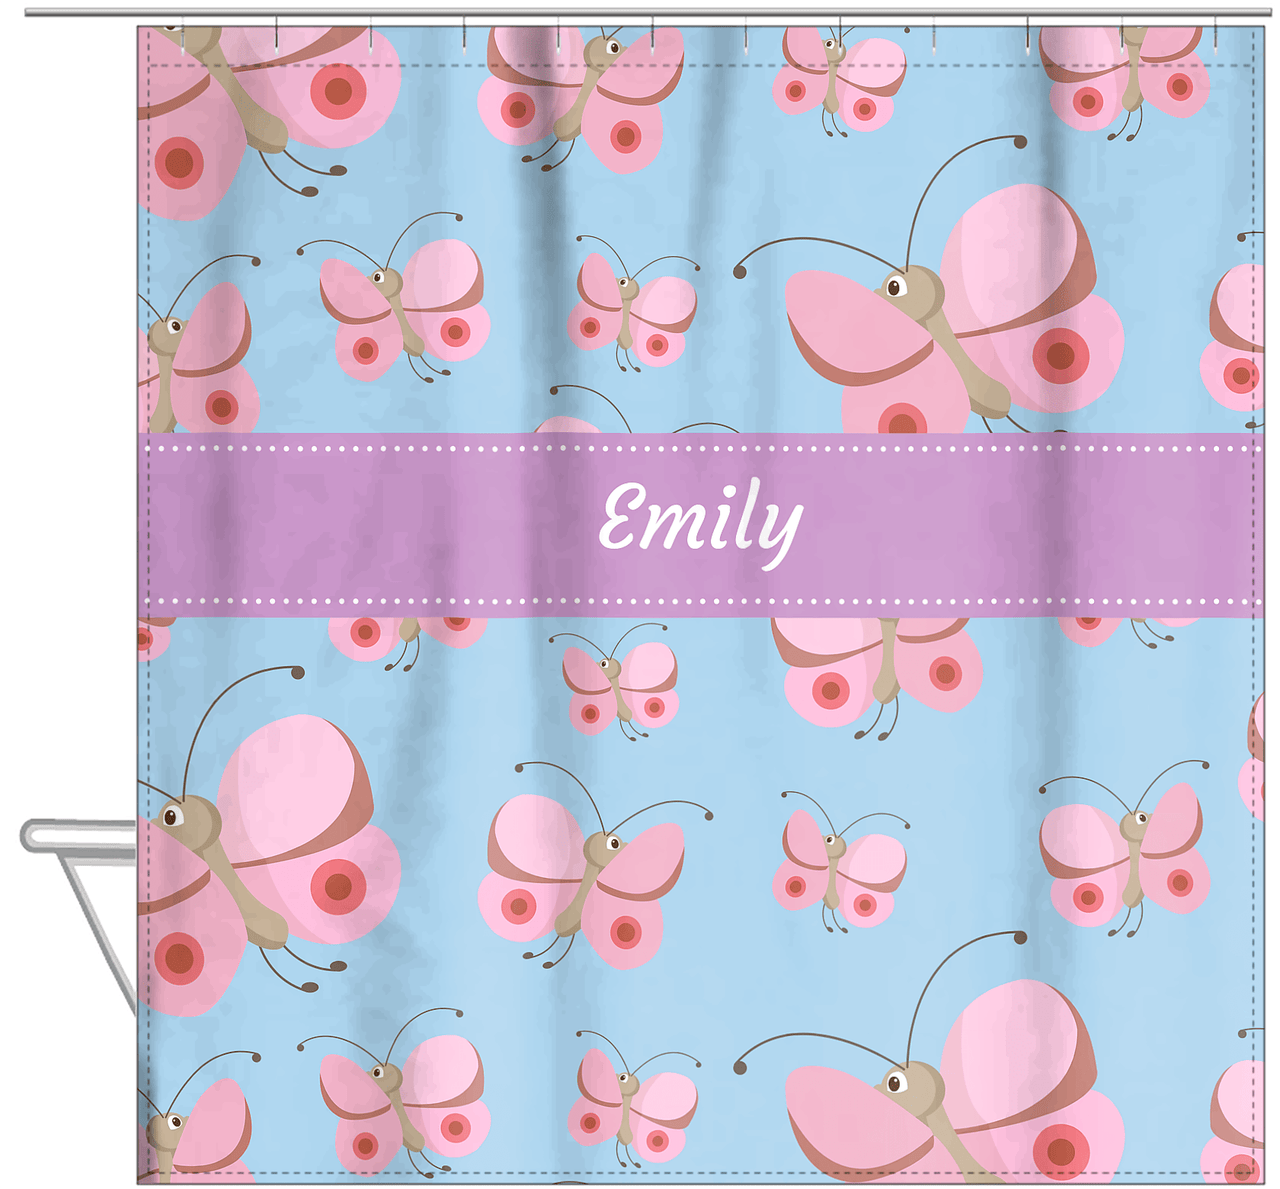 Personalized Butterfly Shower Curtain I - Blue Background - Pink Butterflies II - Hanging View